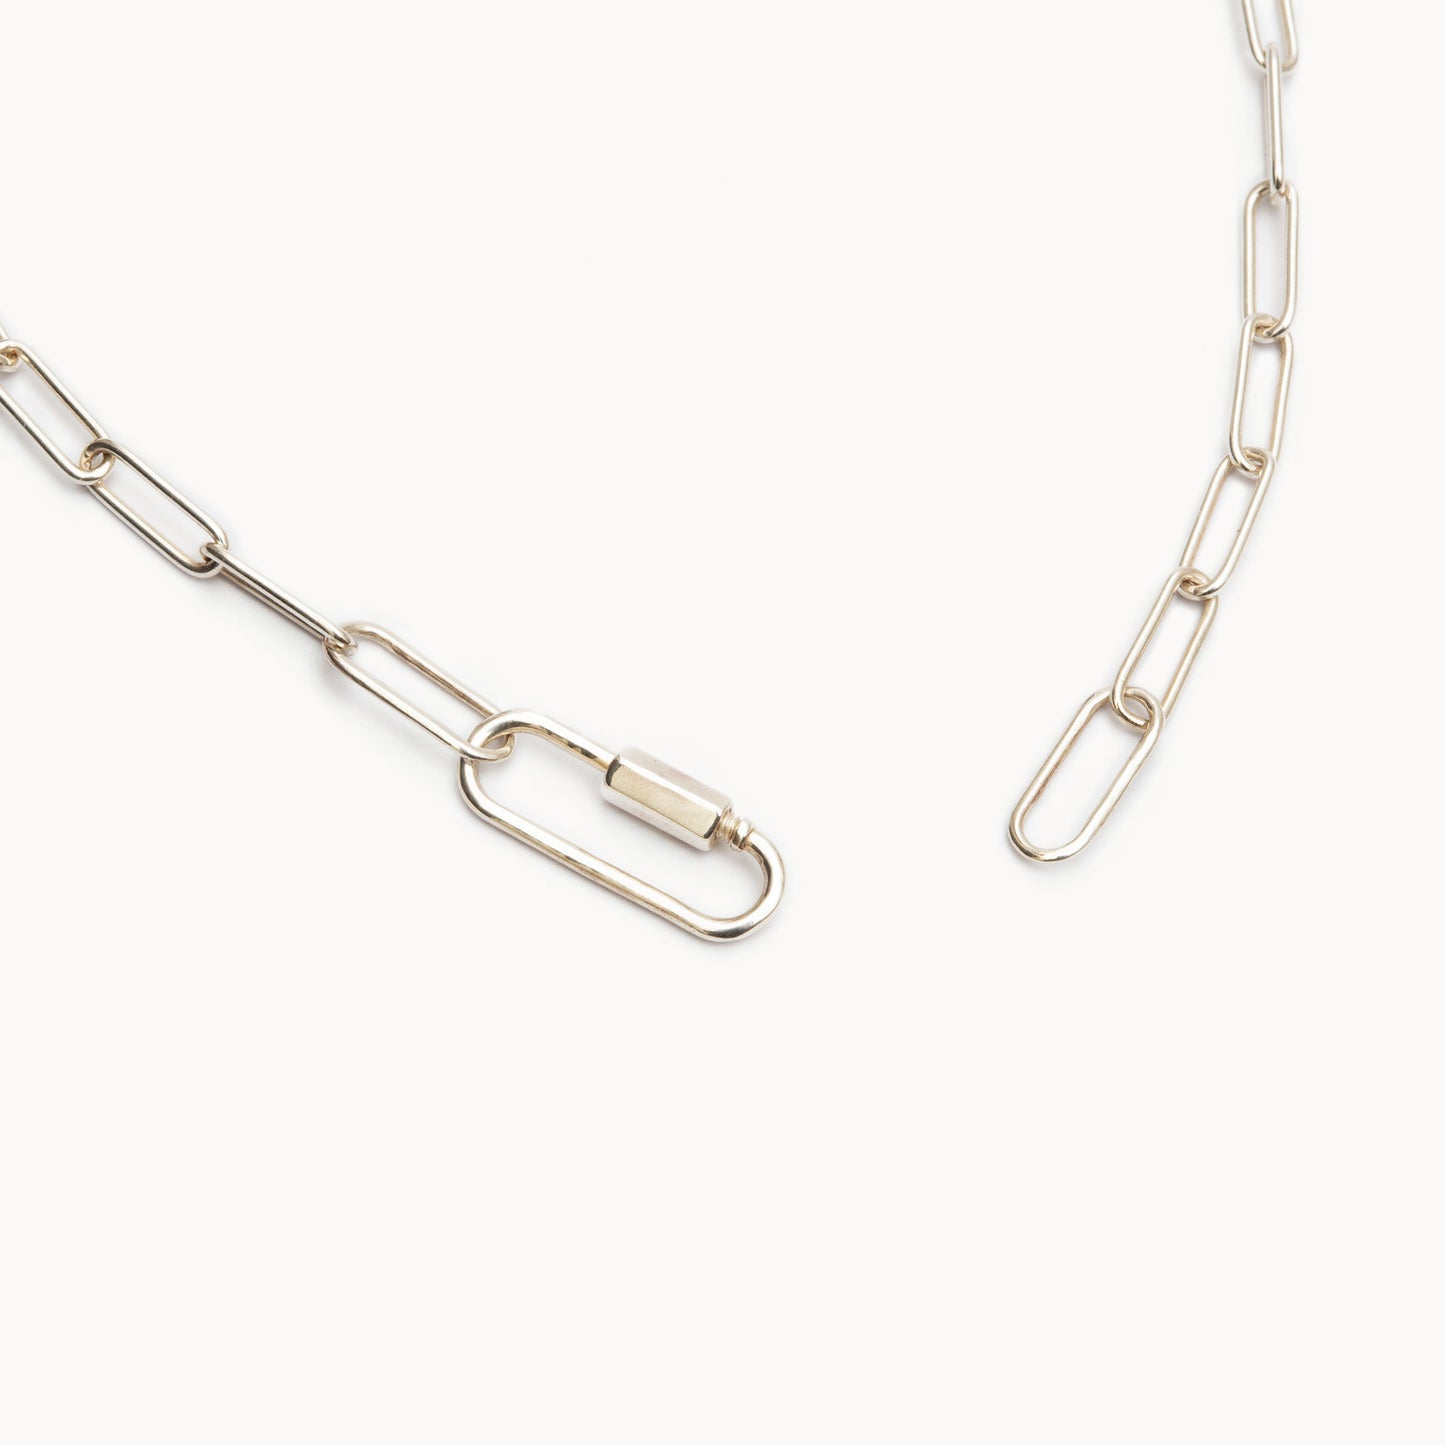 Link Chain Necklace 41 カラビナ付チェーンネックレス